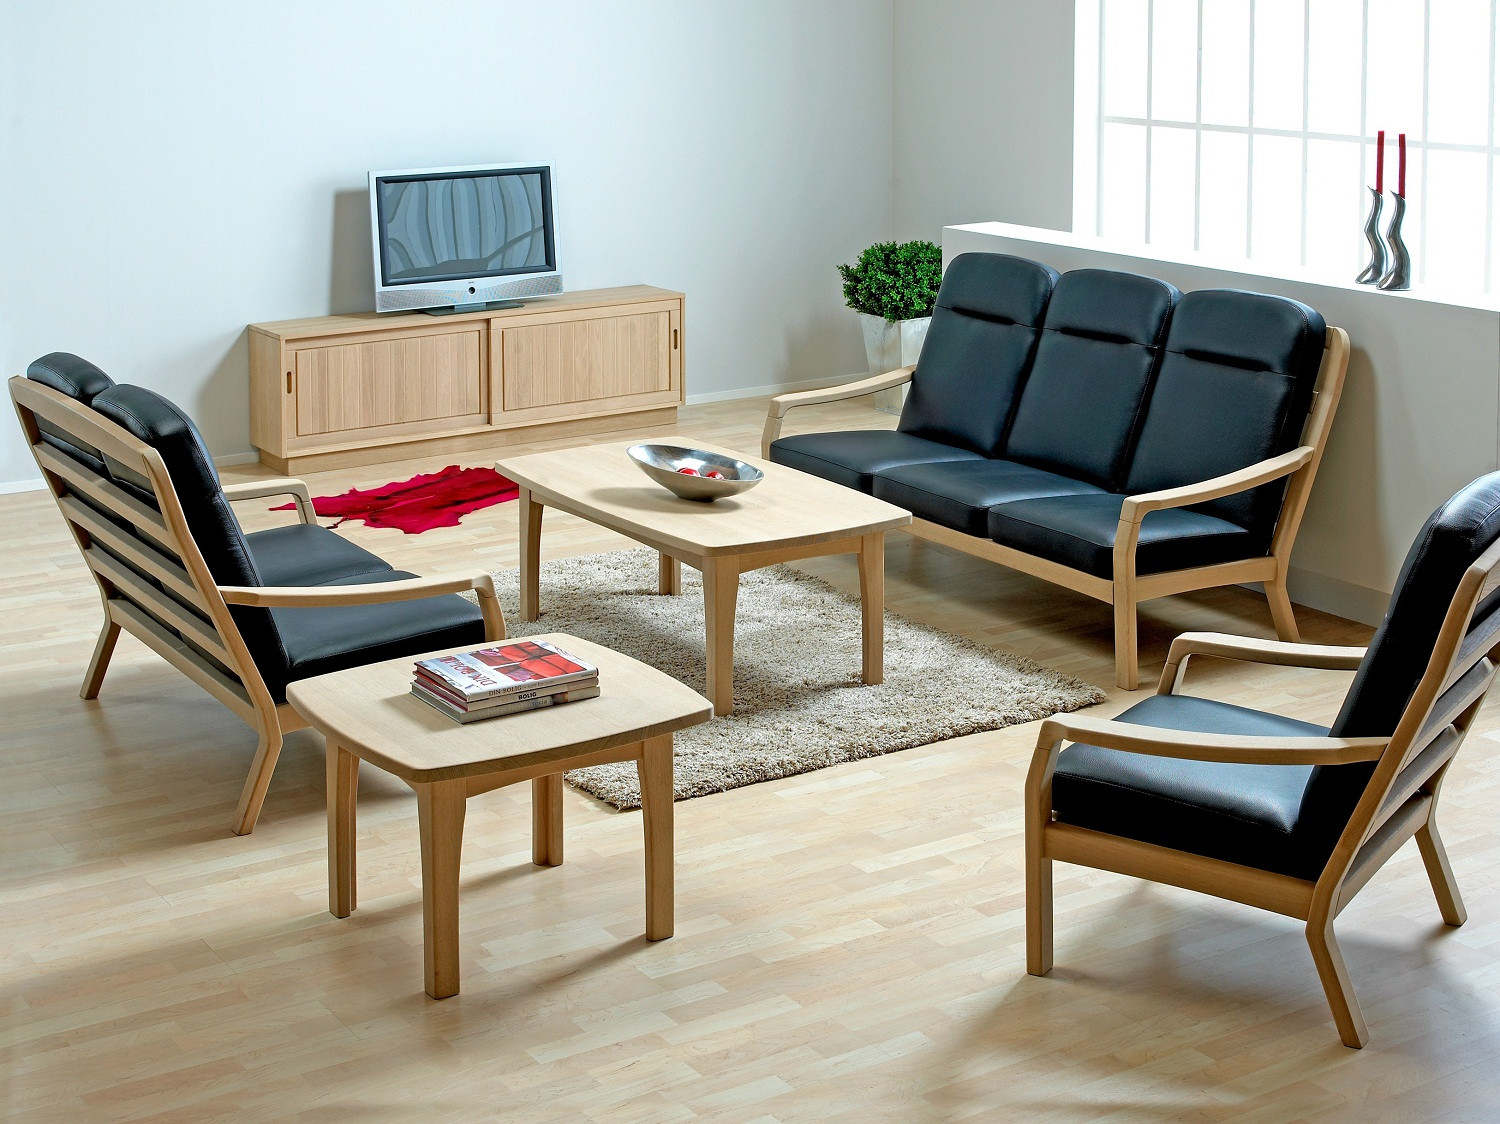 Small Living Room Sets
 24 Simple Wooden Sofa to Use in Your Home